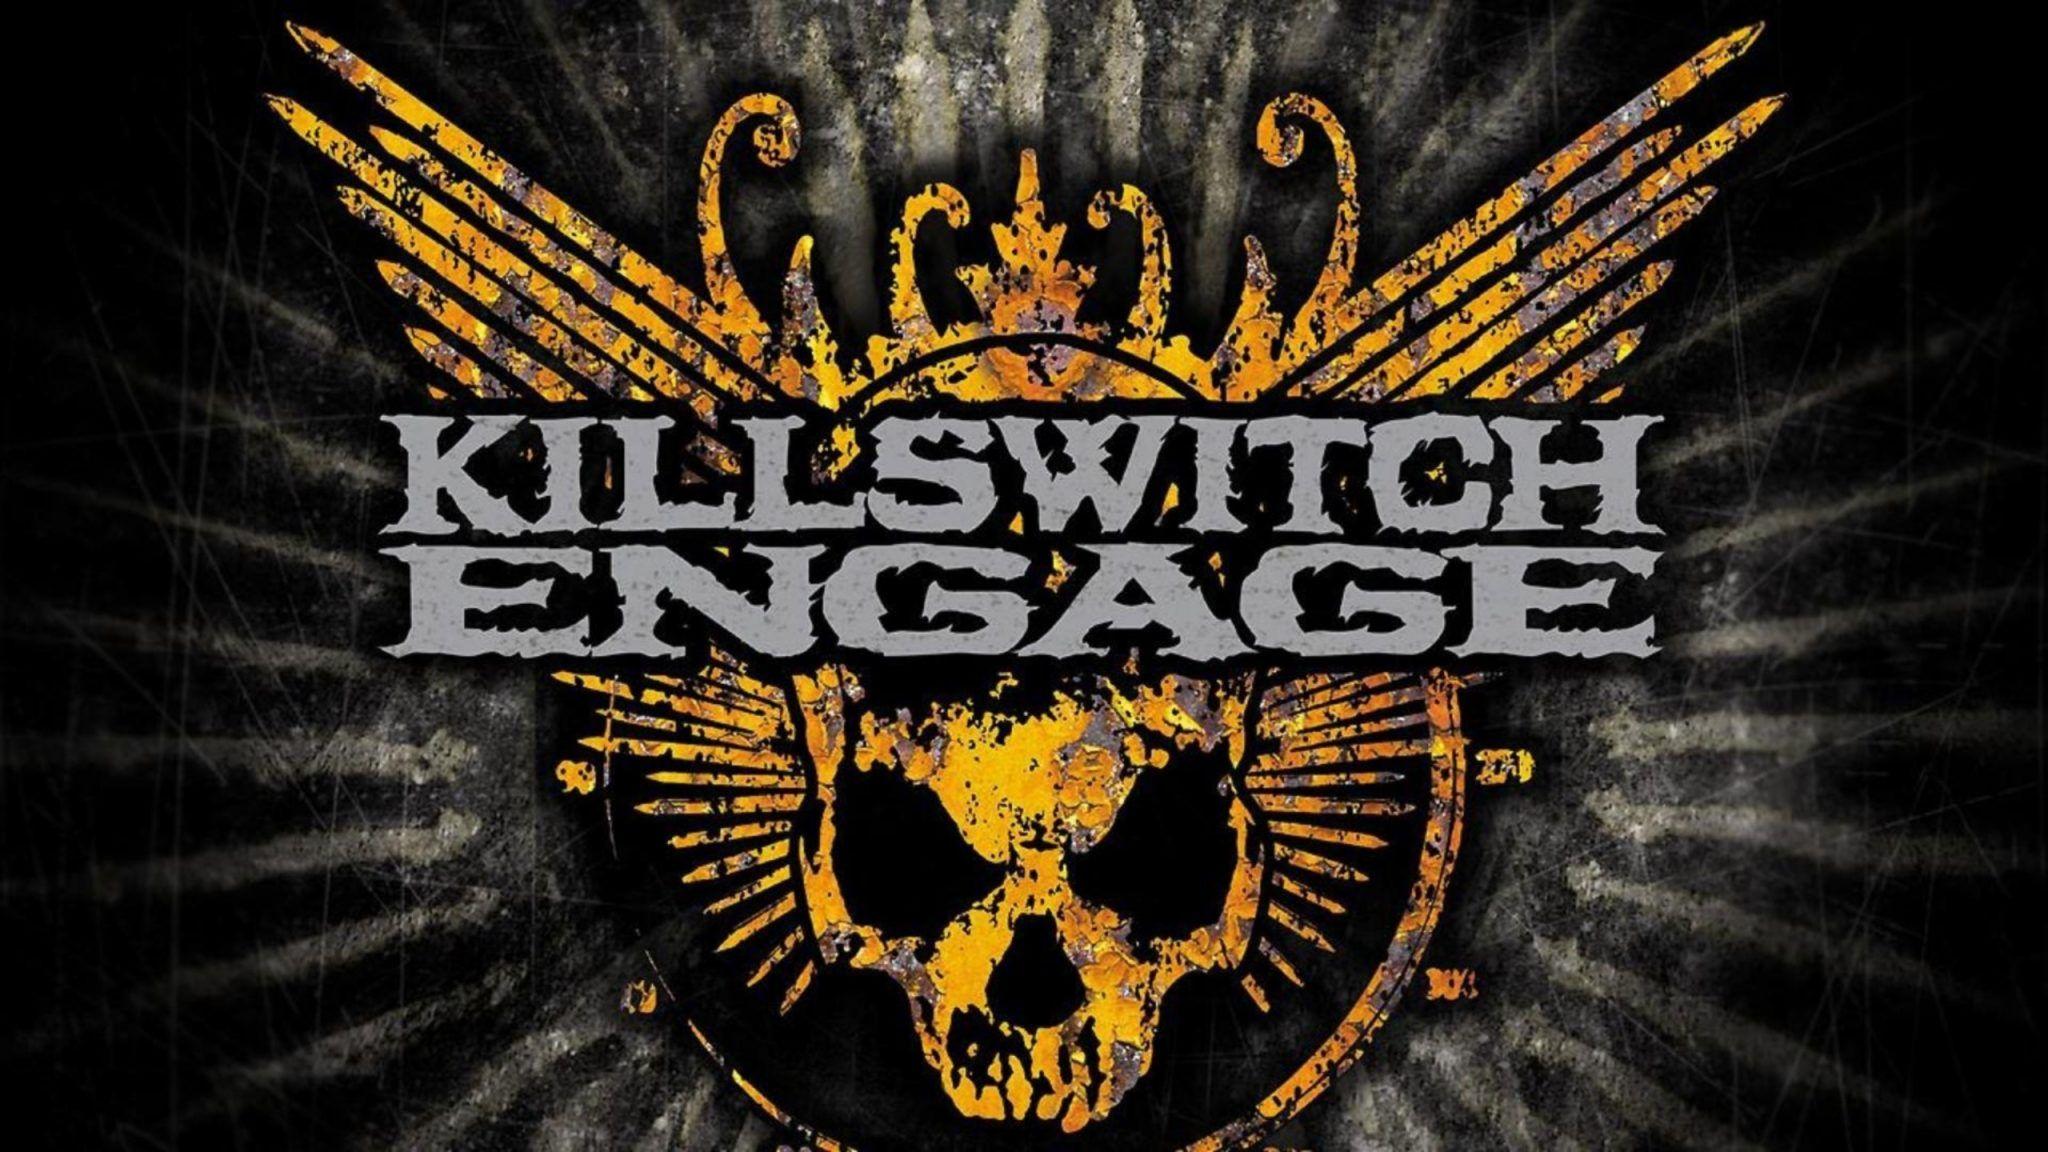 Killswitch Engage Logo - Killswitch Engage - The End of a Heartache DI . - ReampZone